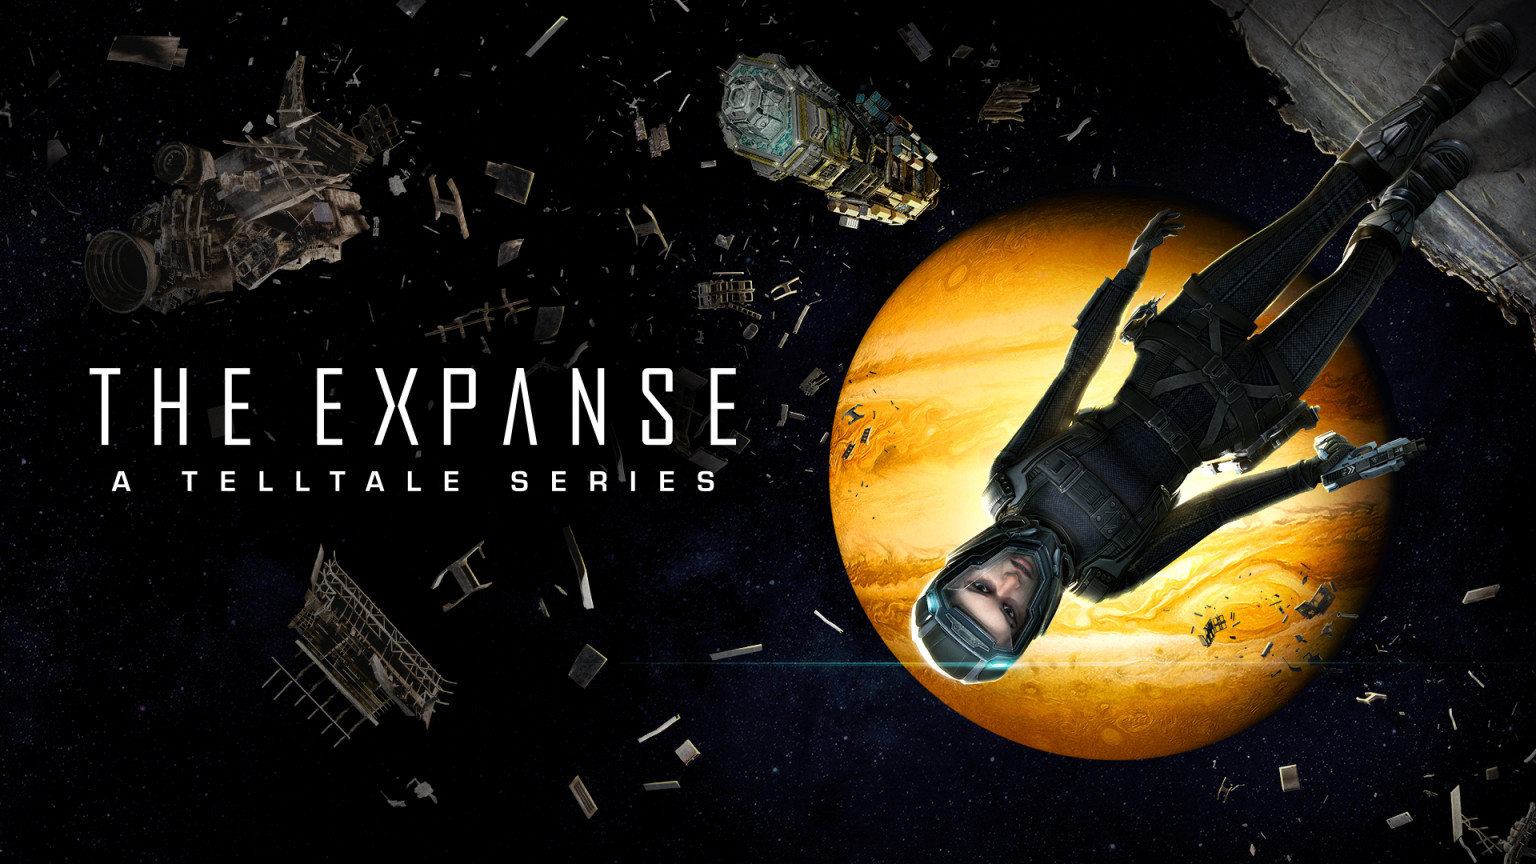 The Expanse: a Telltale series poster

Text: The Expanse: a Telltale series